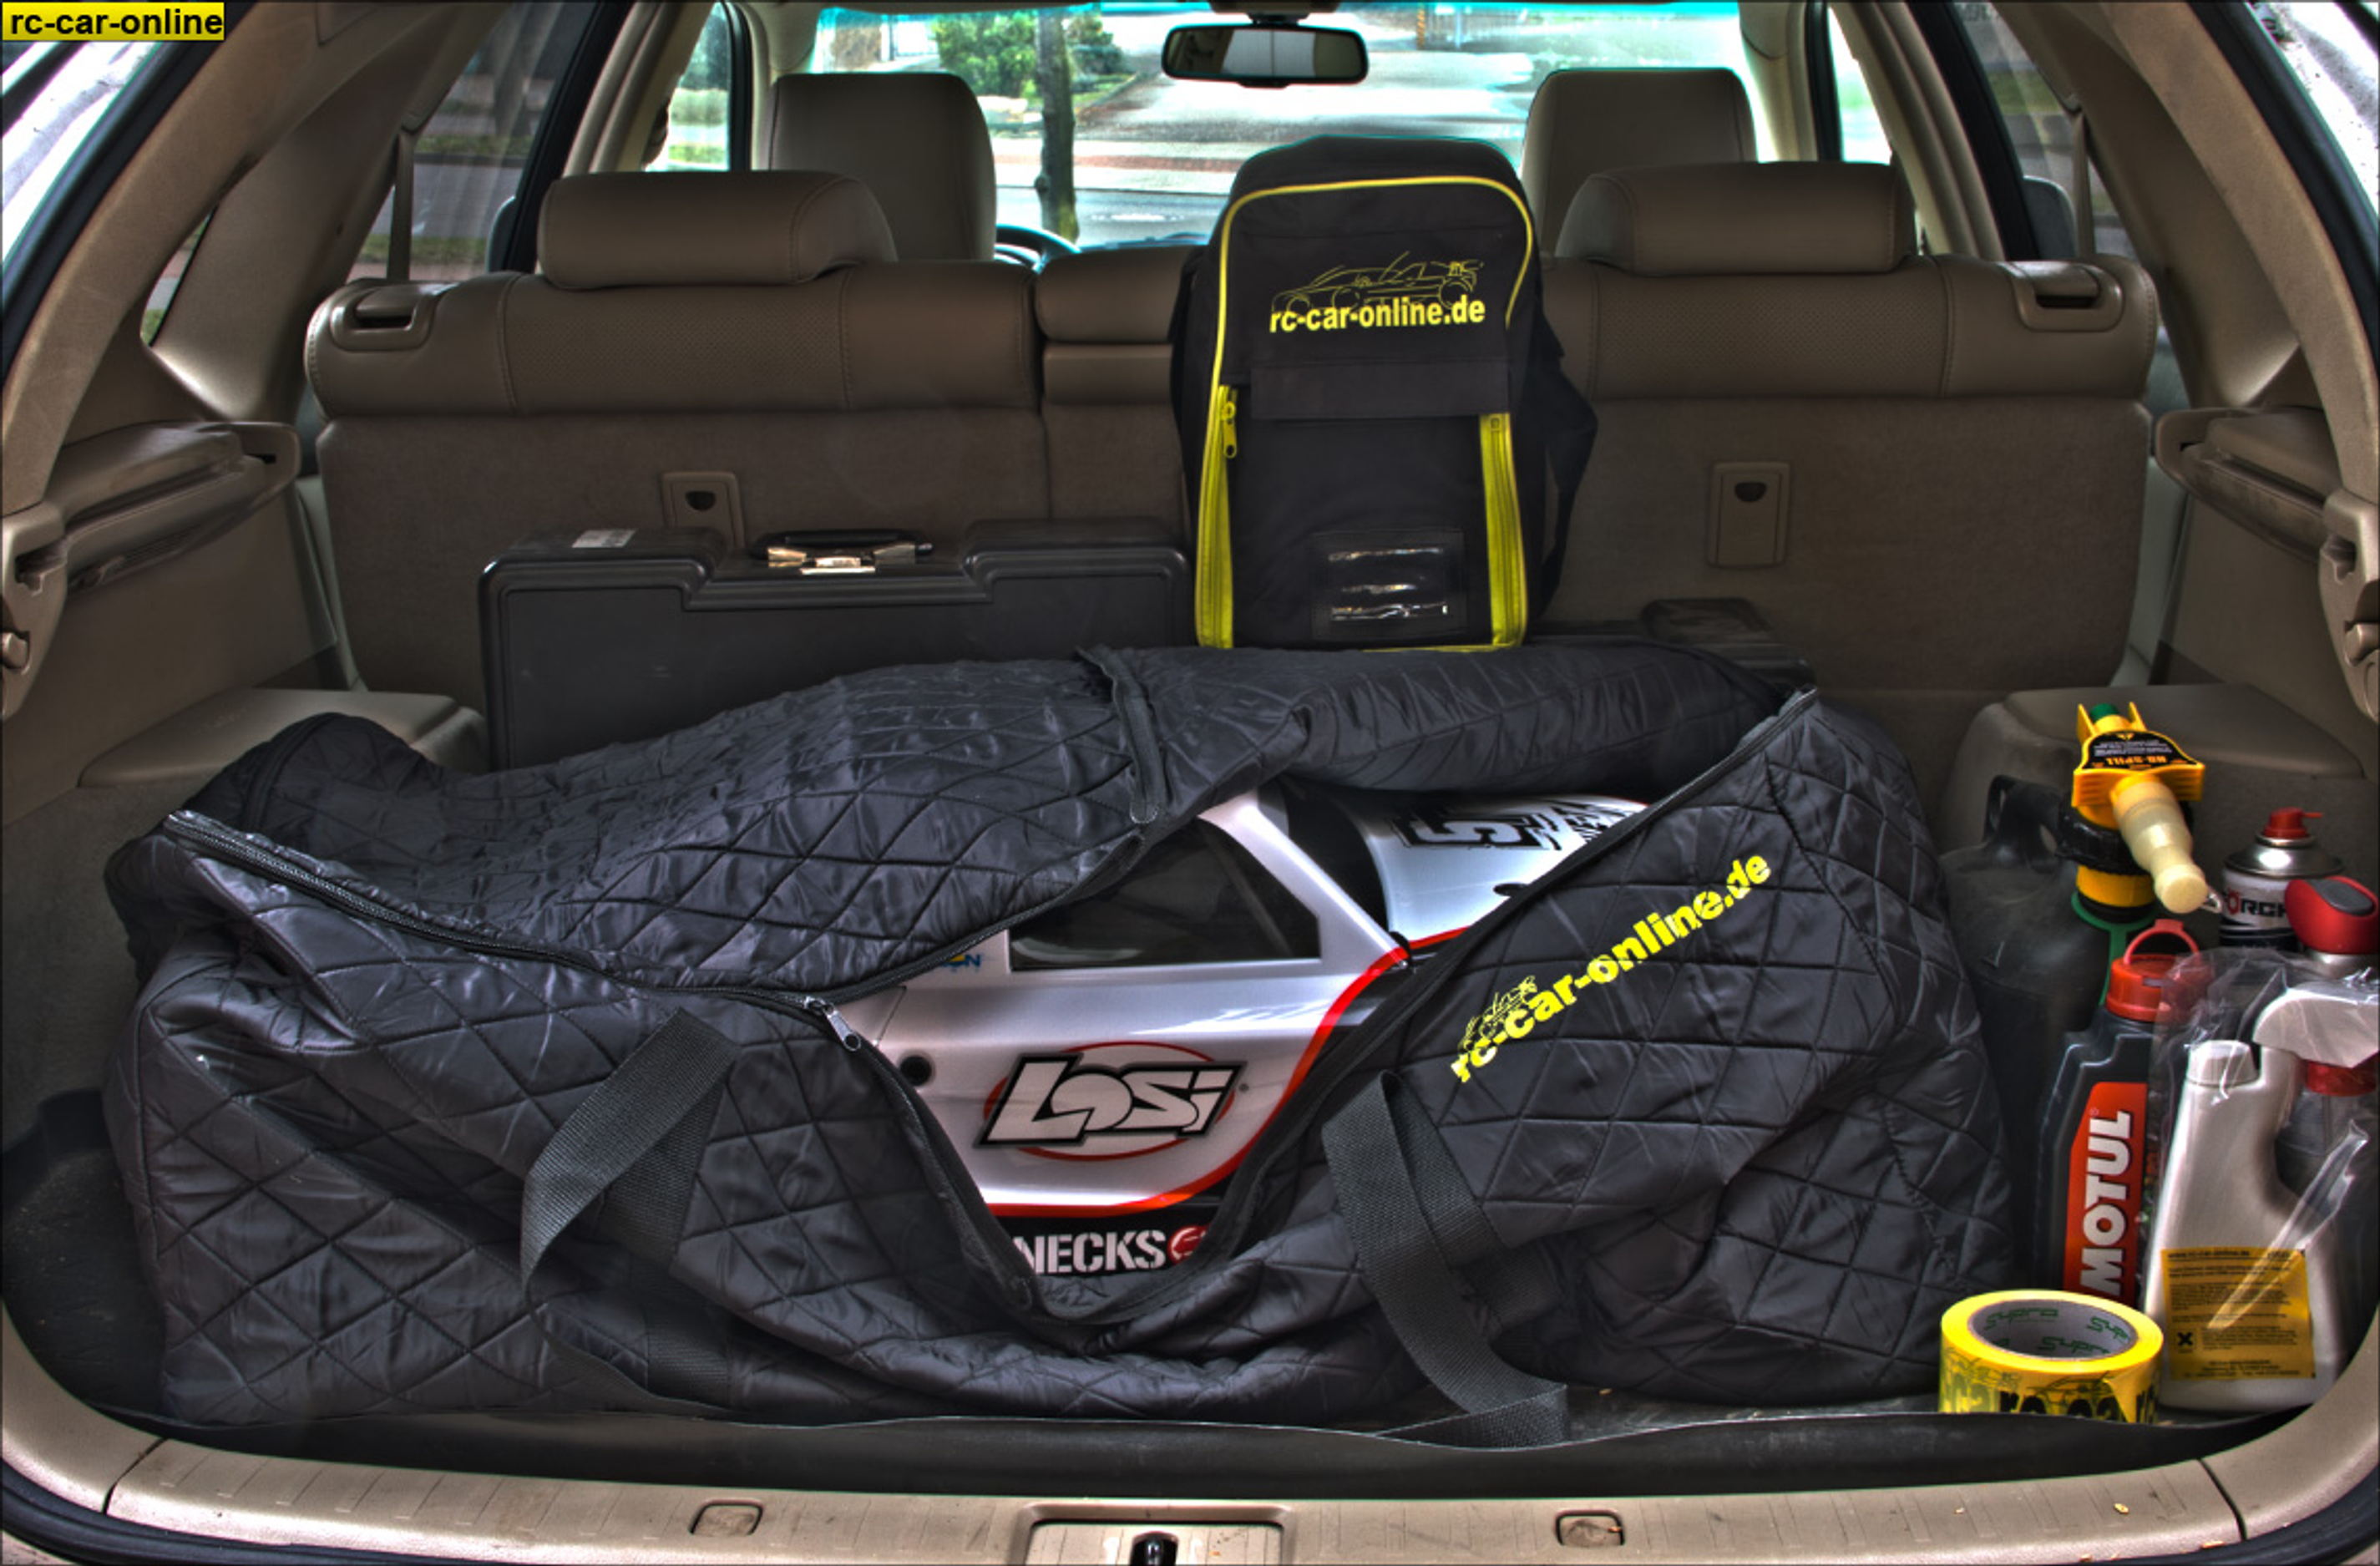 y0558 HT Car Bag XXL for Losi 5ive-T/2.0, Mini 5ive WRC, Desert Buggy XL and many more